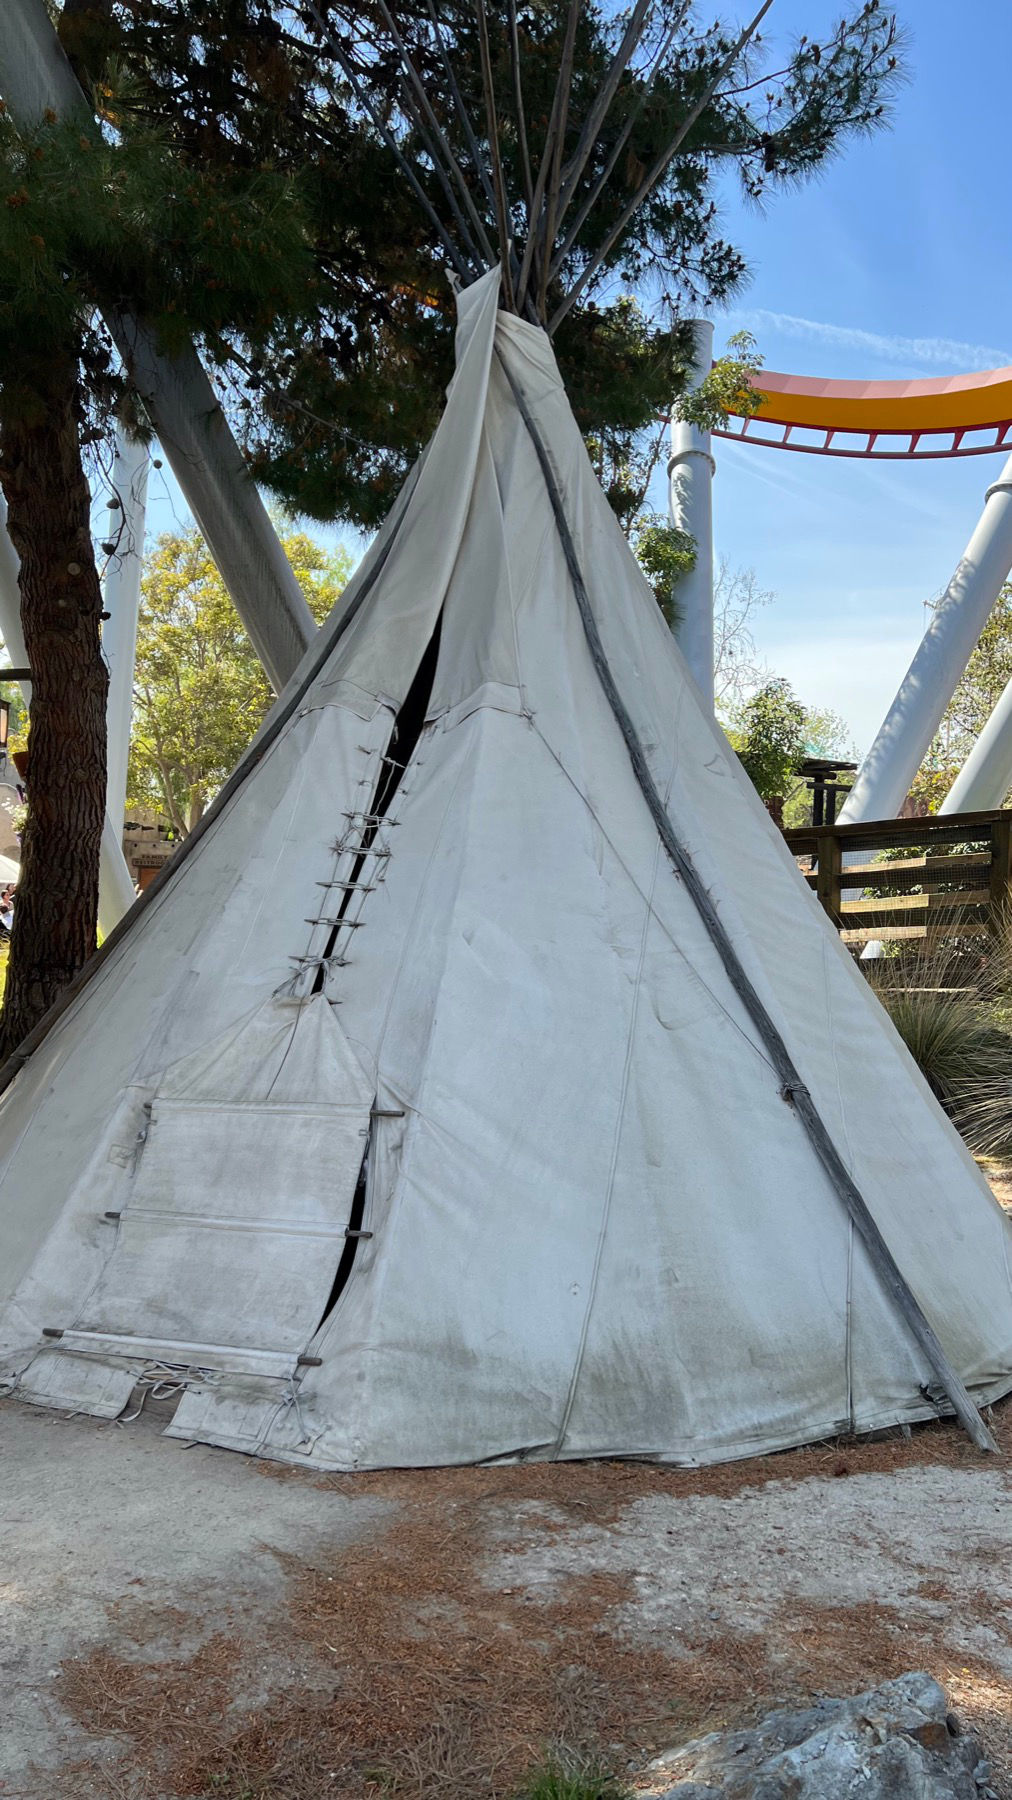 Indian Trails Teepee